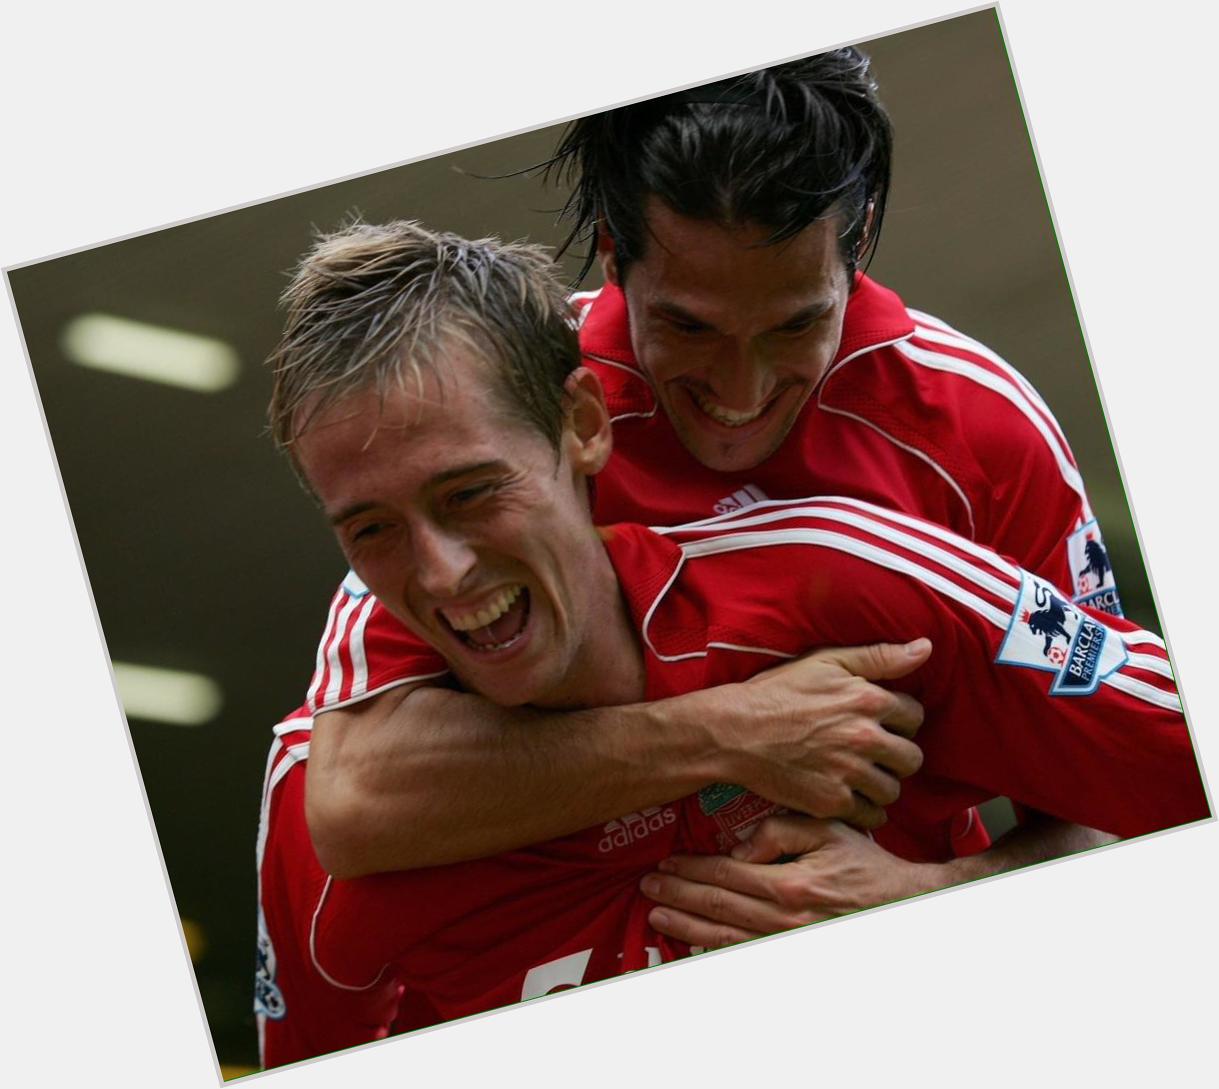 Happy birthday to former LFC player Peter crouch. Enjoy your day   